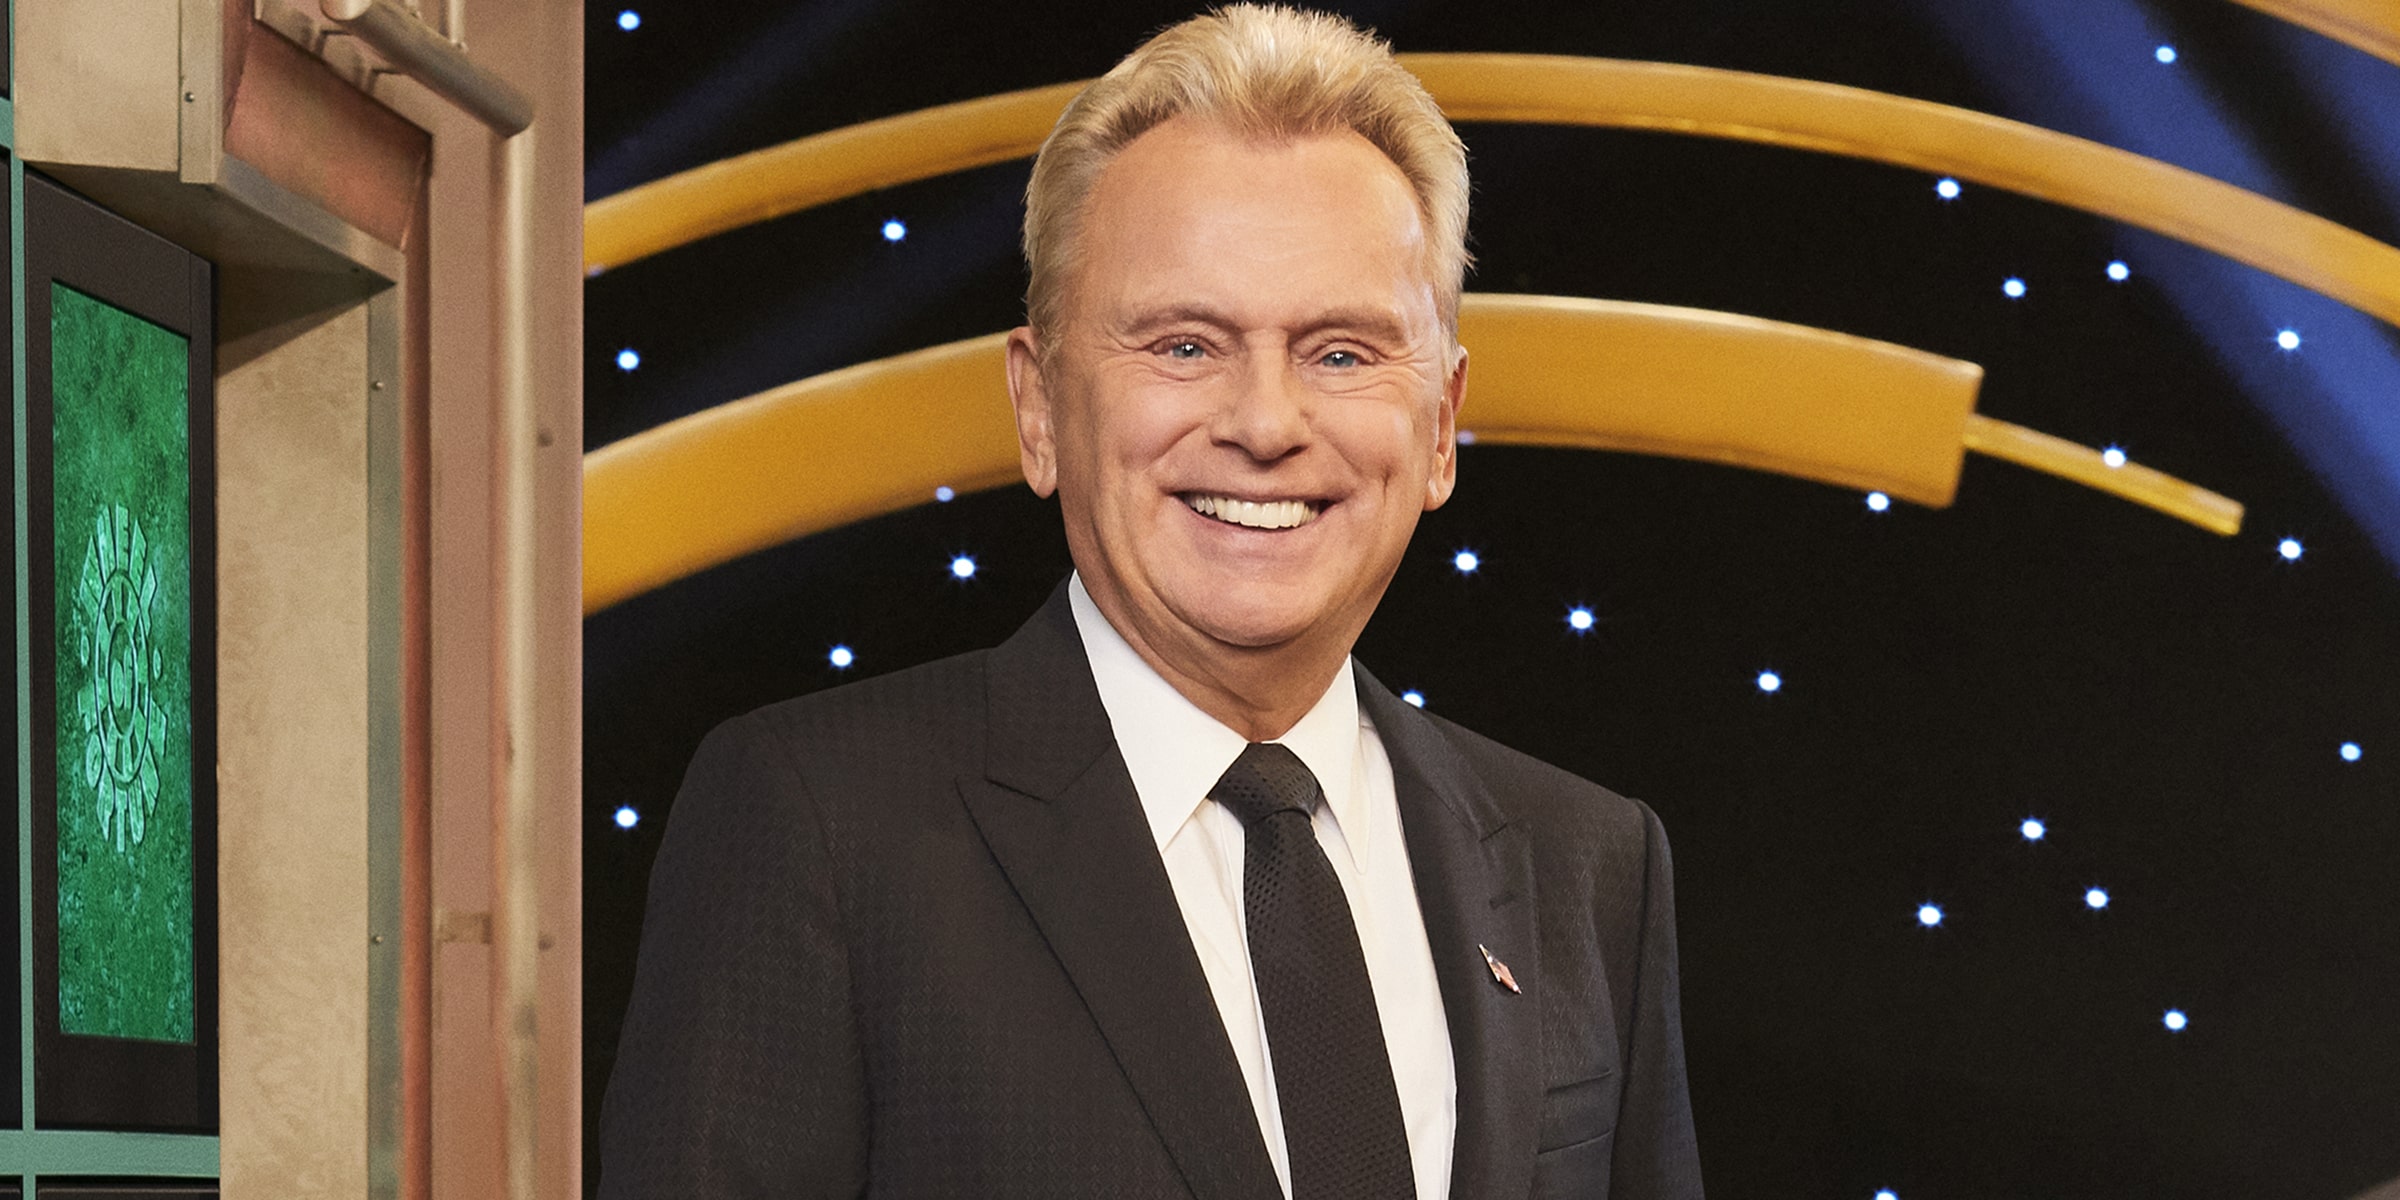 pat sajak in news interview